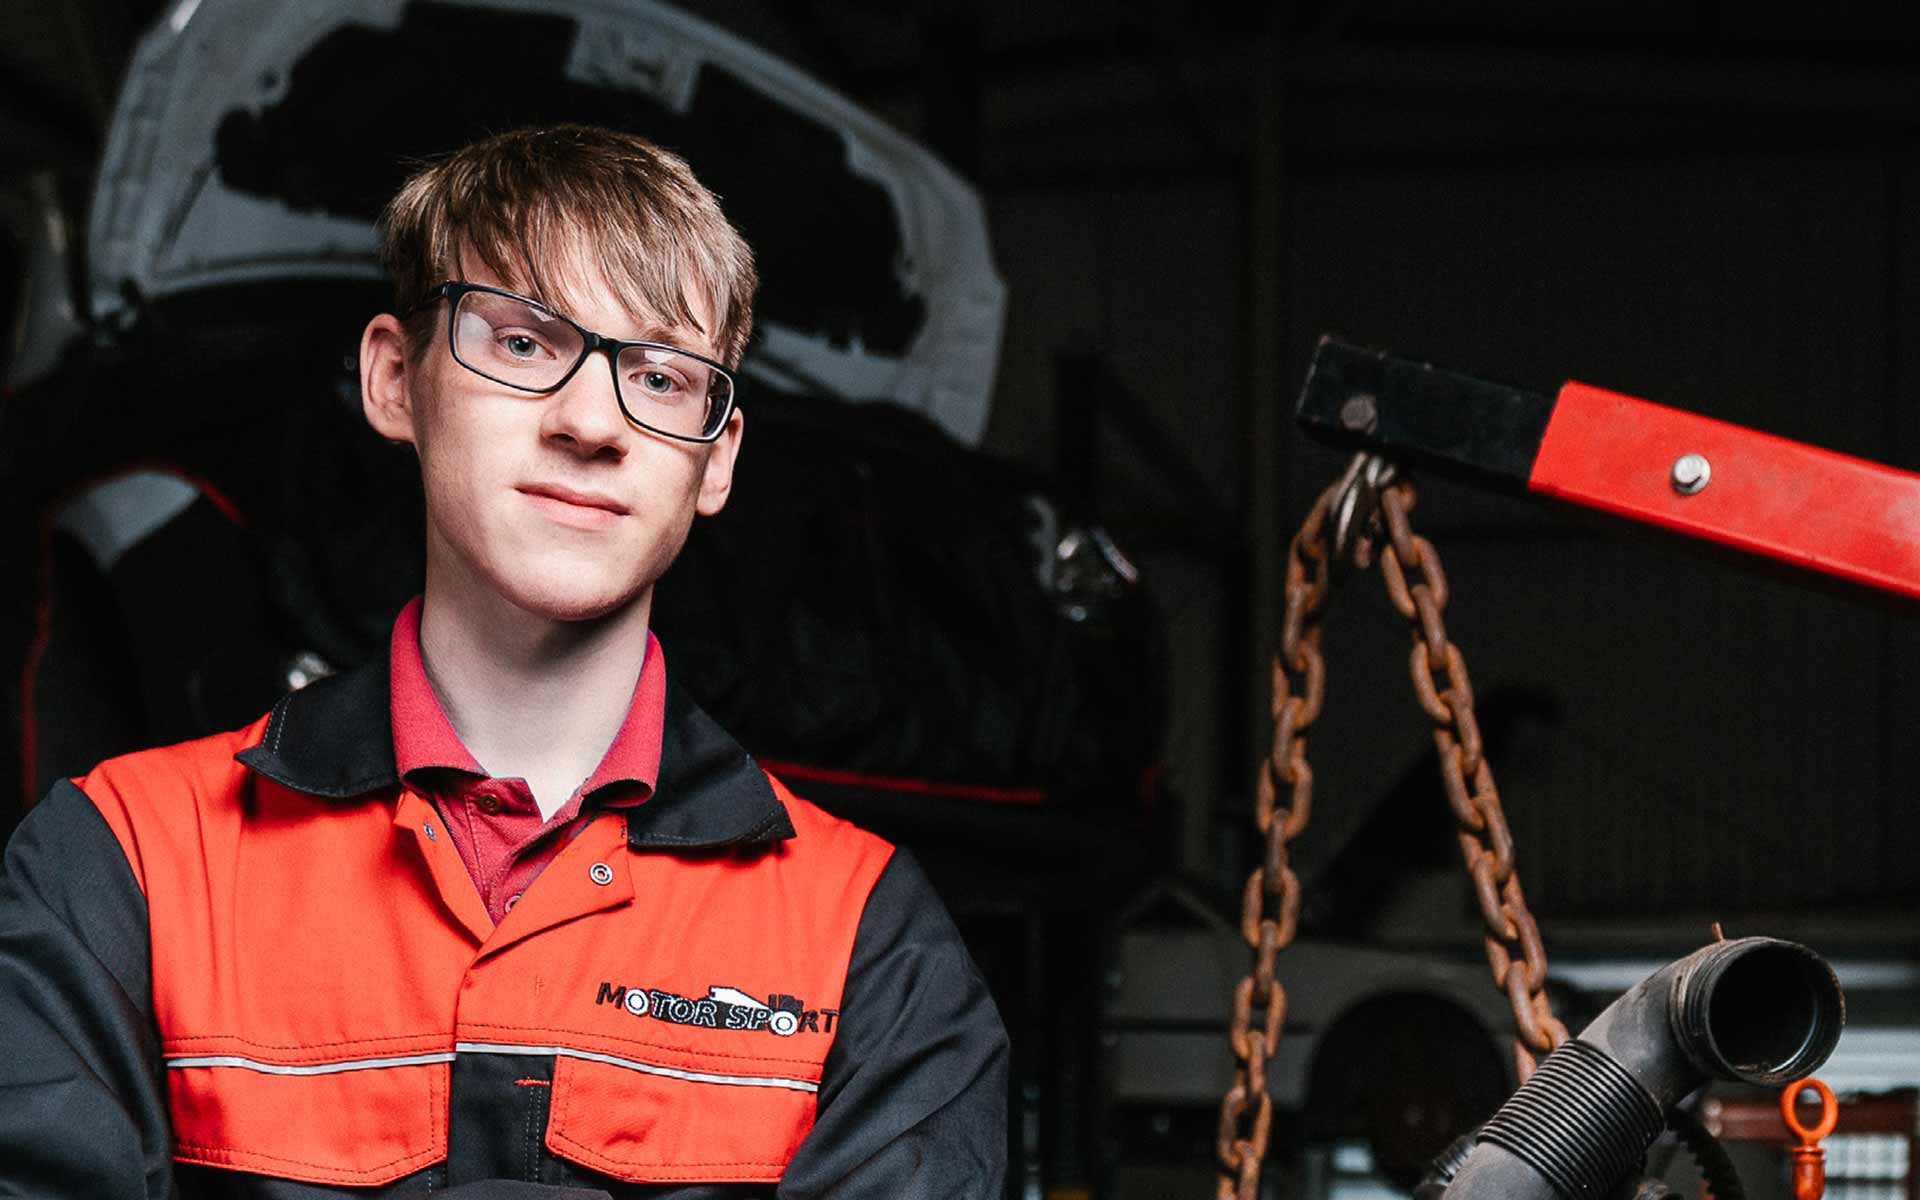 Stood in front of an open car bonnet, which is raised on a lifting platform in the garage workspace, student Jake looks intently at us with arms folded, wearing vibrant red and black workshop overalls. To Jake's side is part of some piping material and a harness chain holding some equipment that is out of view